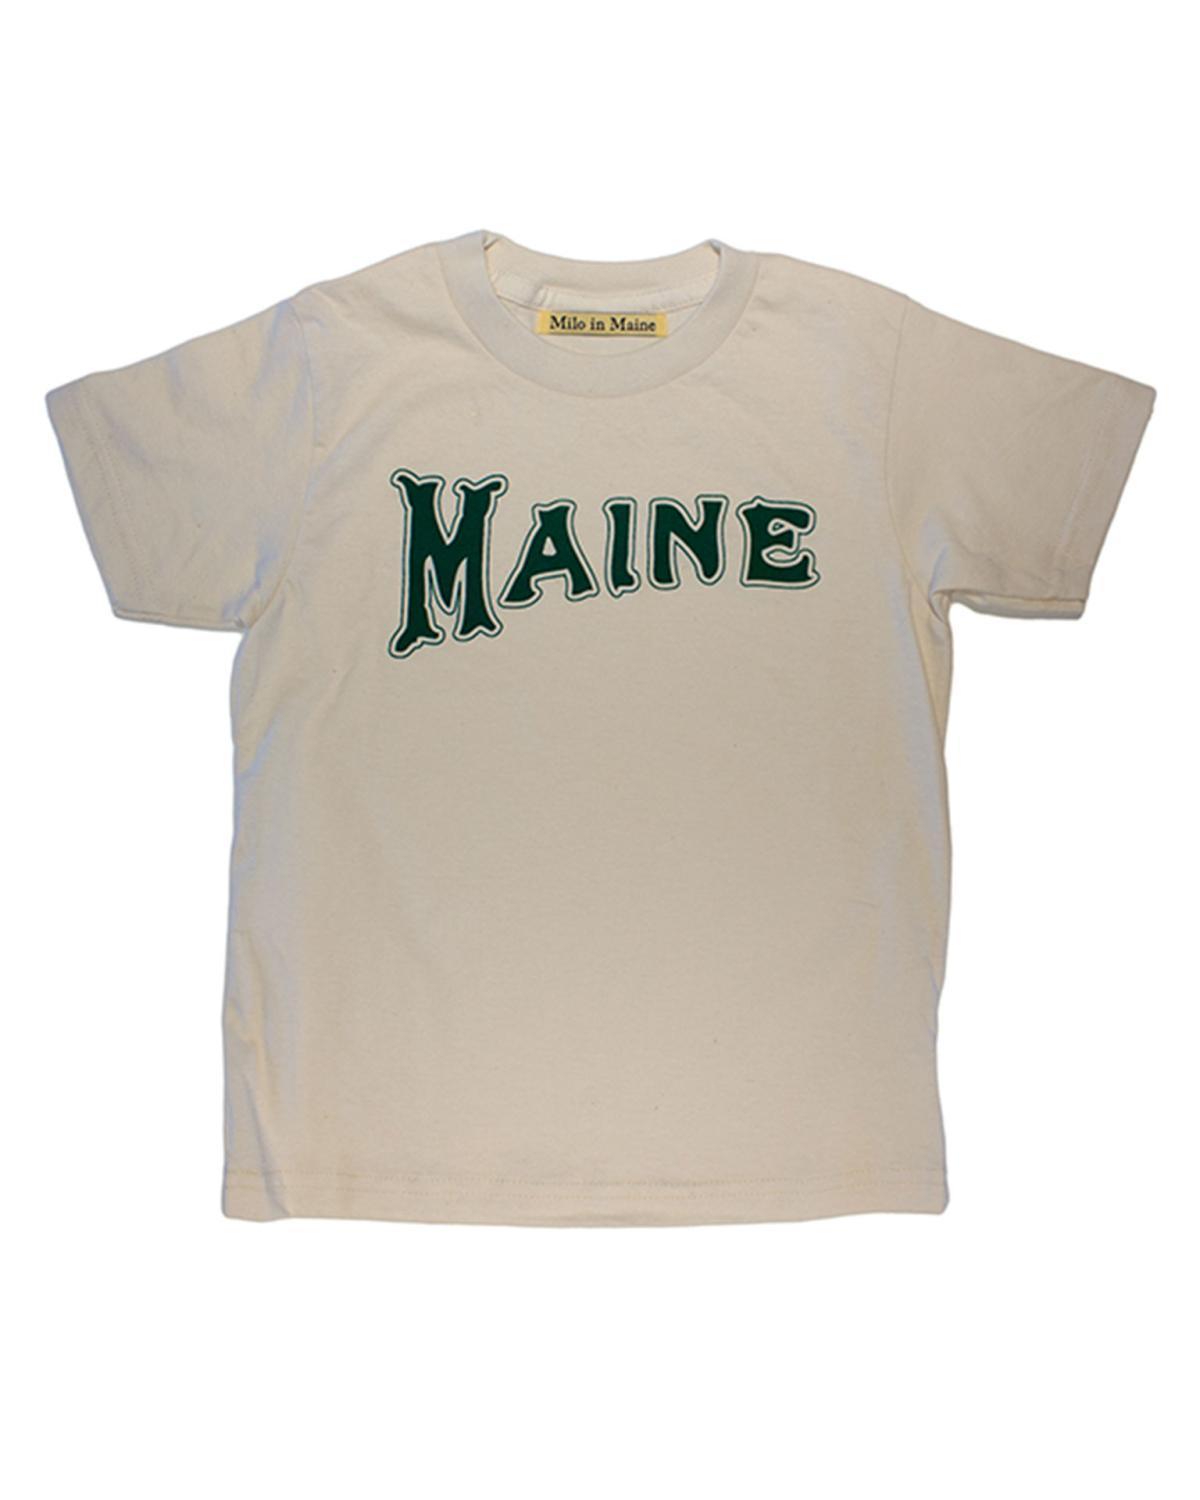 Little milo in maine baby boy 3-6 S/S Baby Maine Tee in Natural + Green